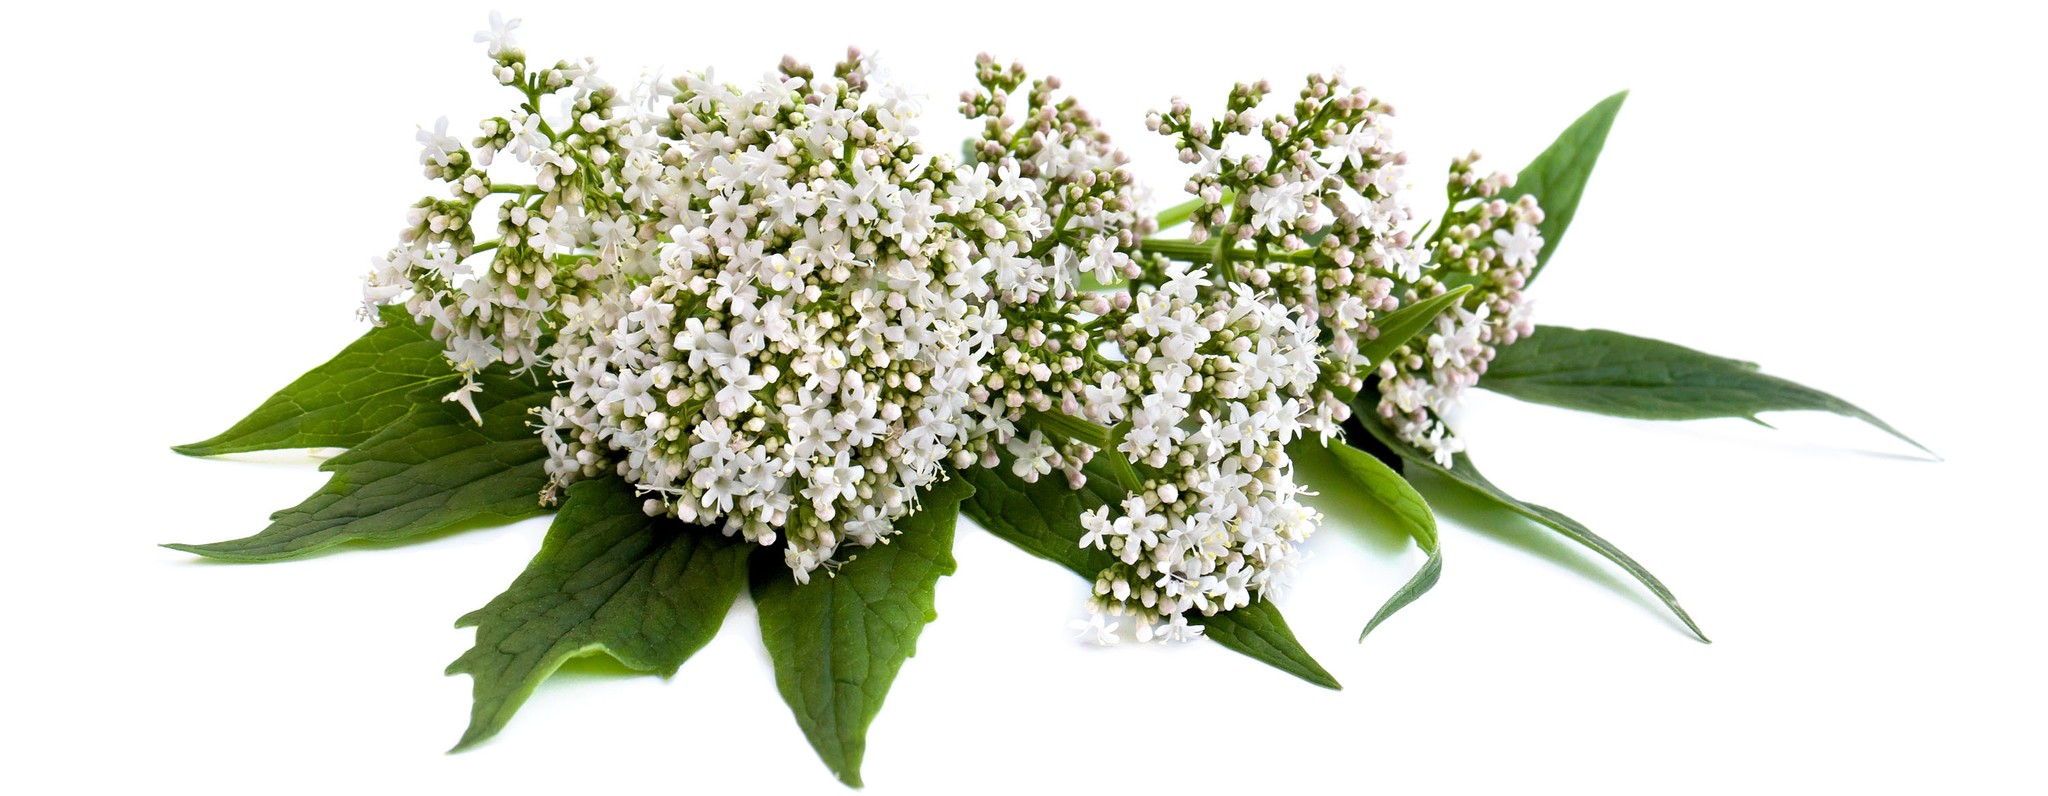 Valerian flowers and leaves with white background